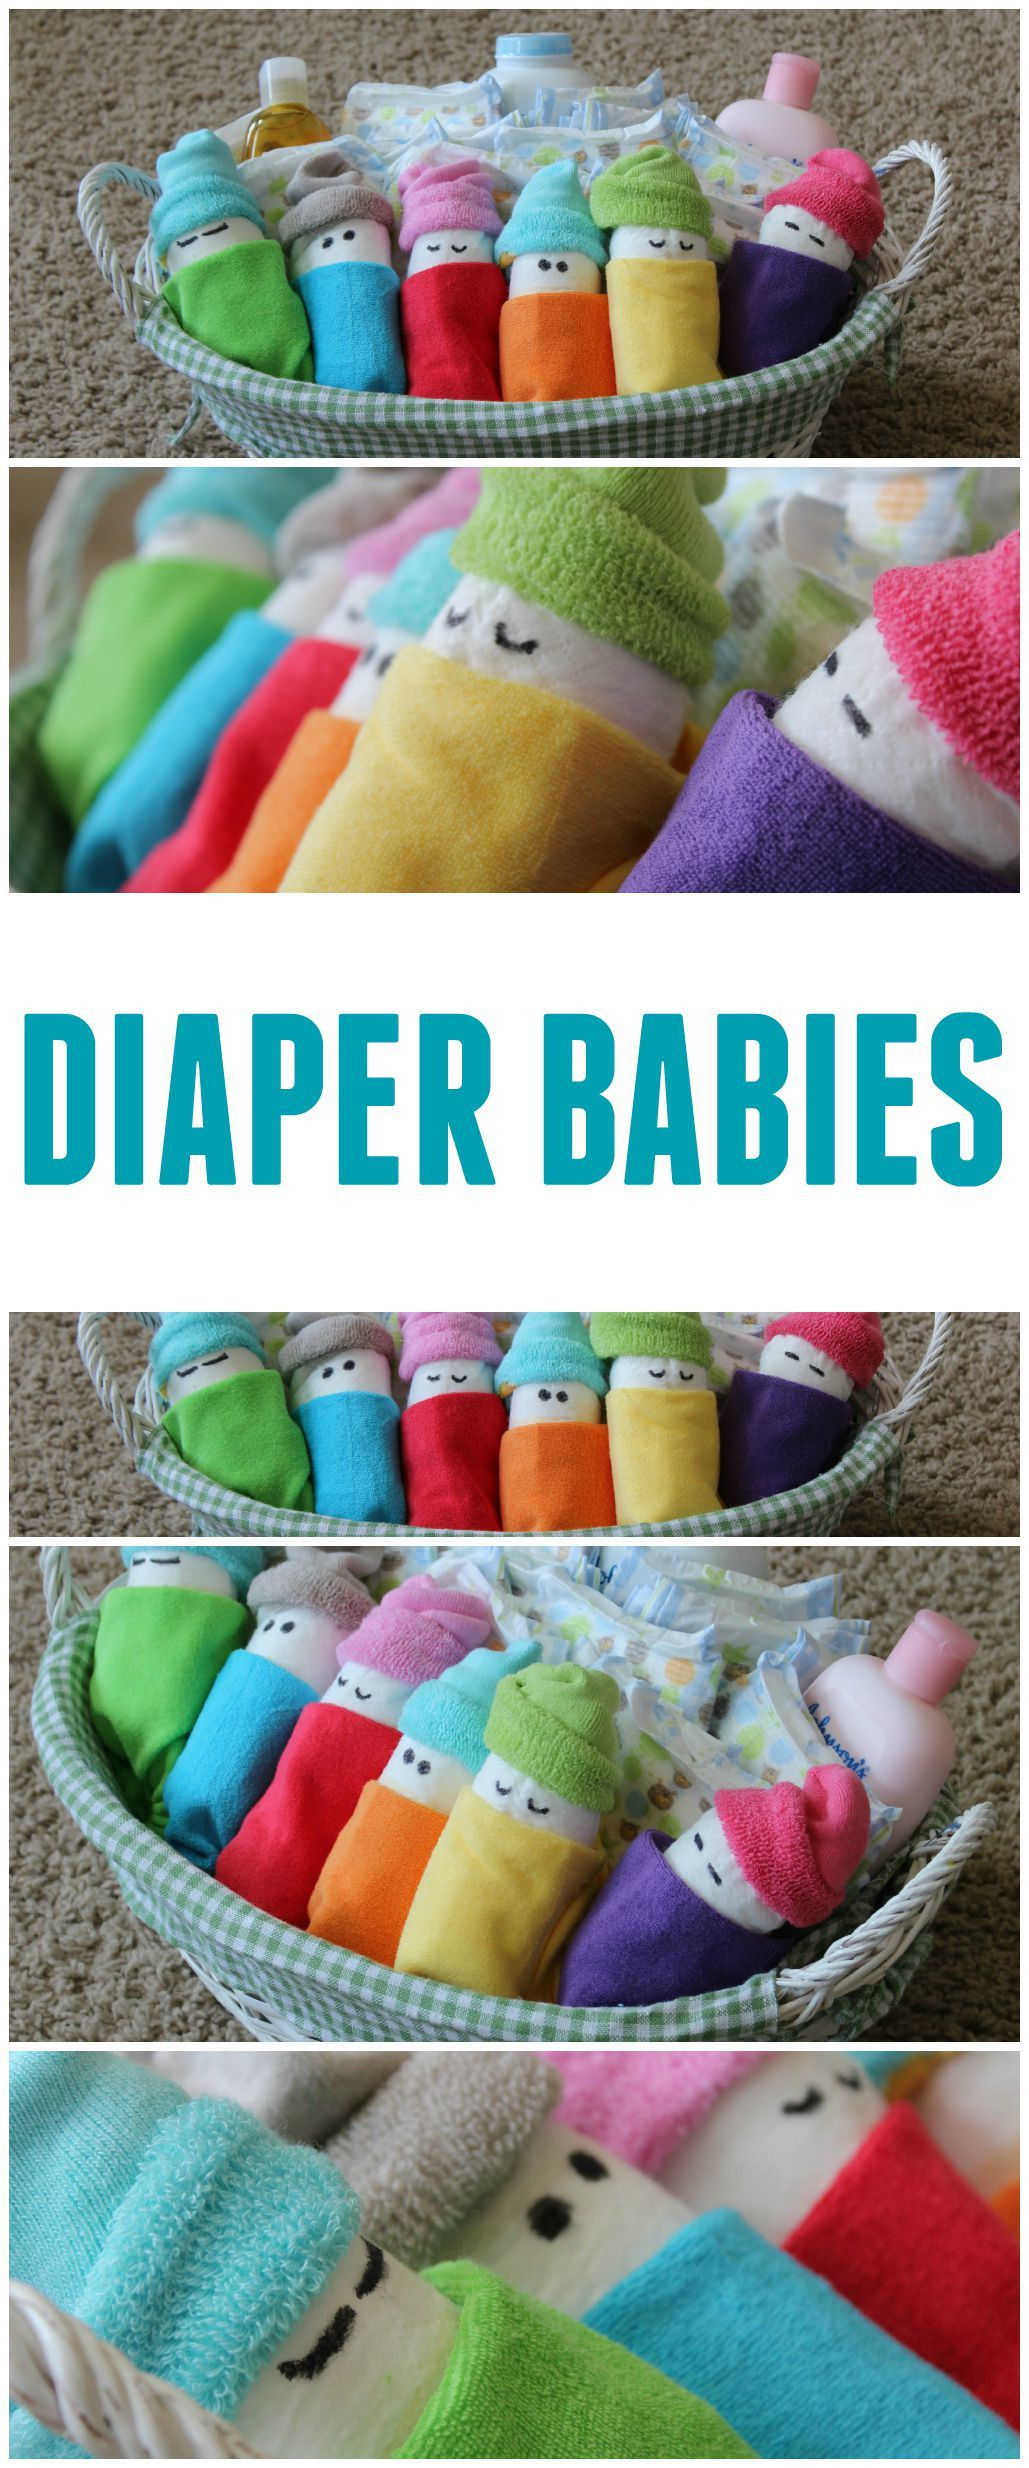 Diaper Baby Shower Gift Ideas
 How To Make Diaper Babies Easy Baby Shower Gift Idea